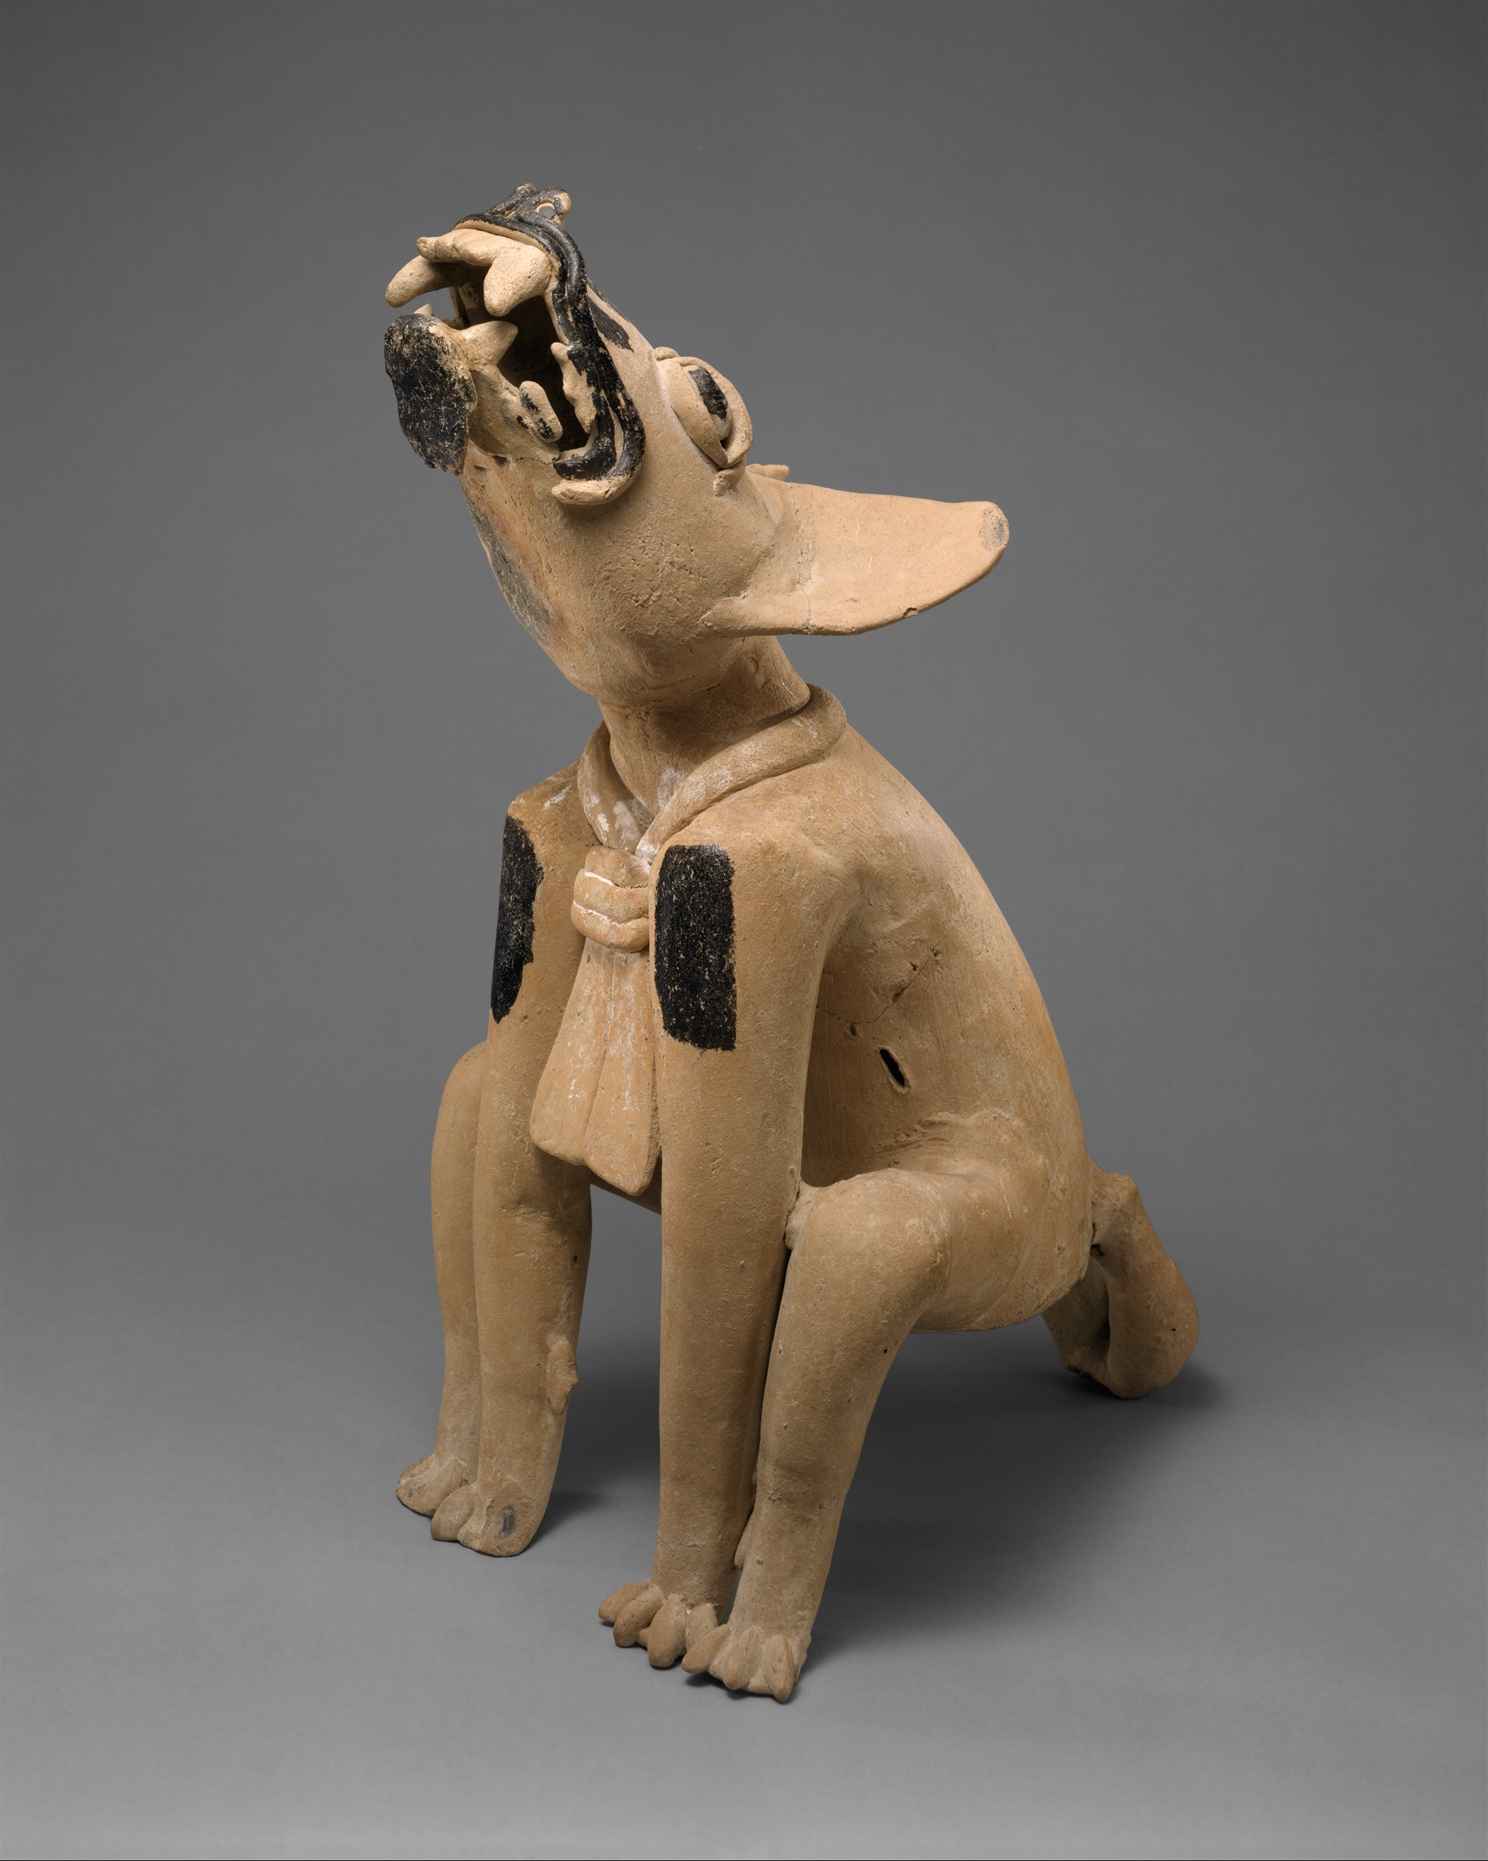 Howling Canine, 5th-6th Century Mexico